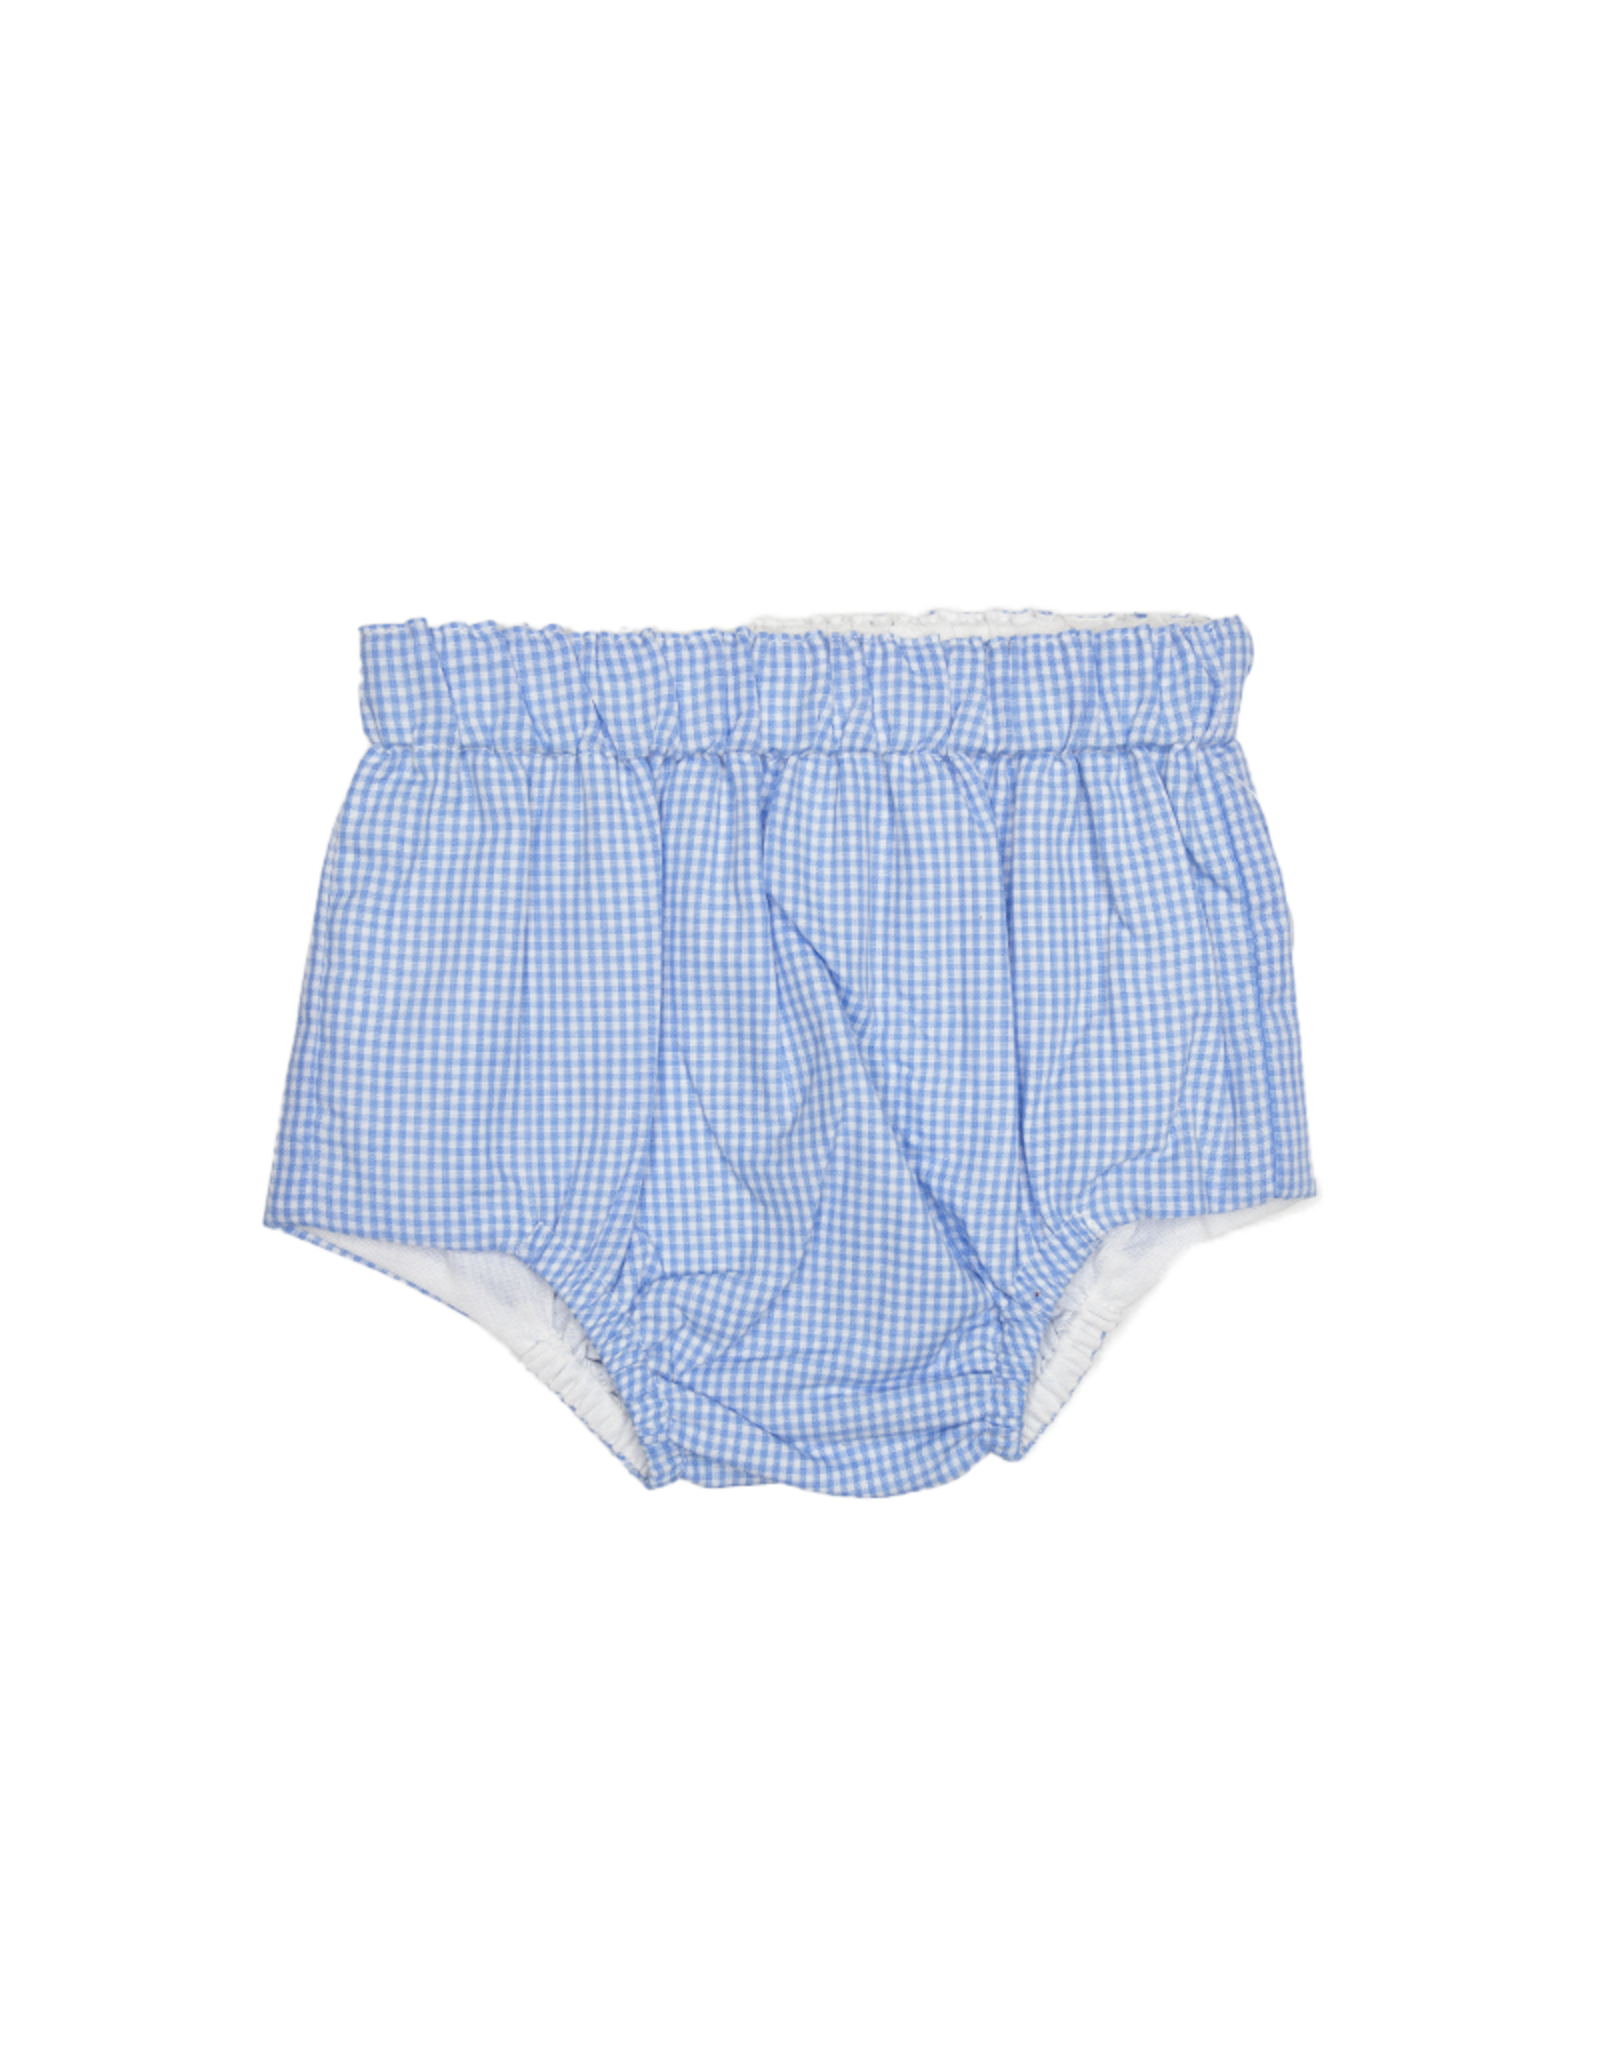 Remember Nguyen BSW-BX Boy Diaper Cover Blue Gingham